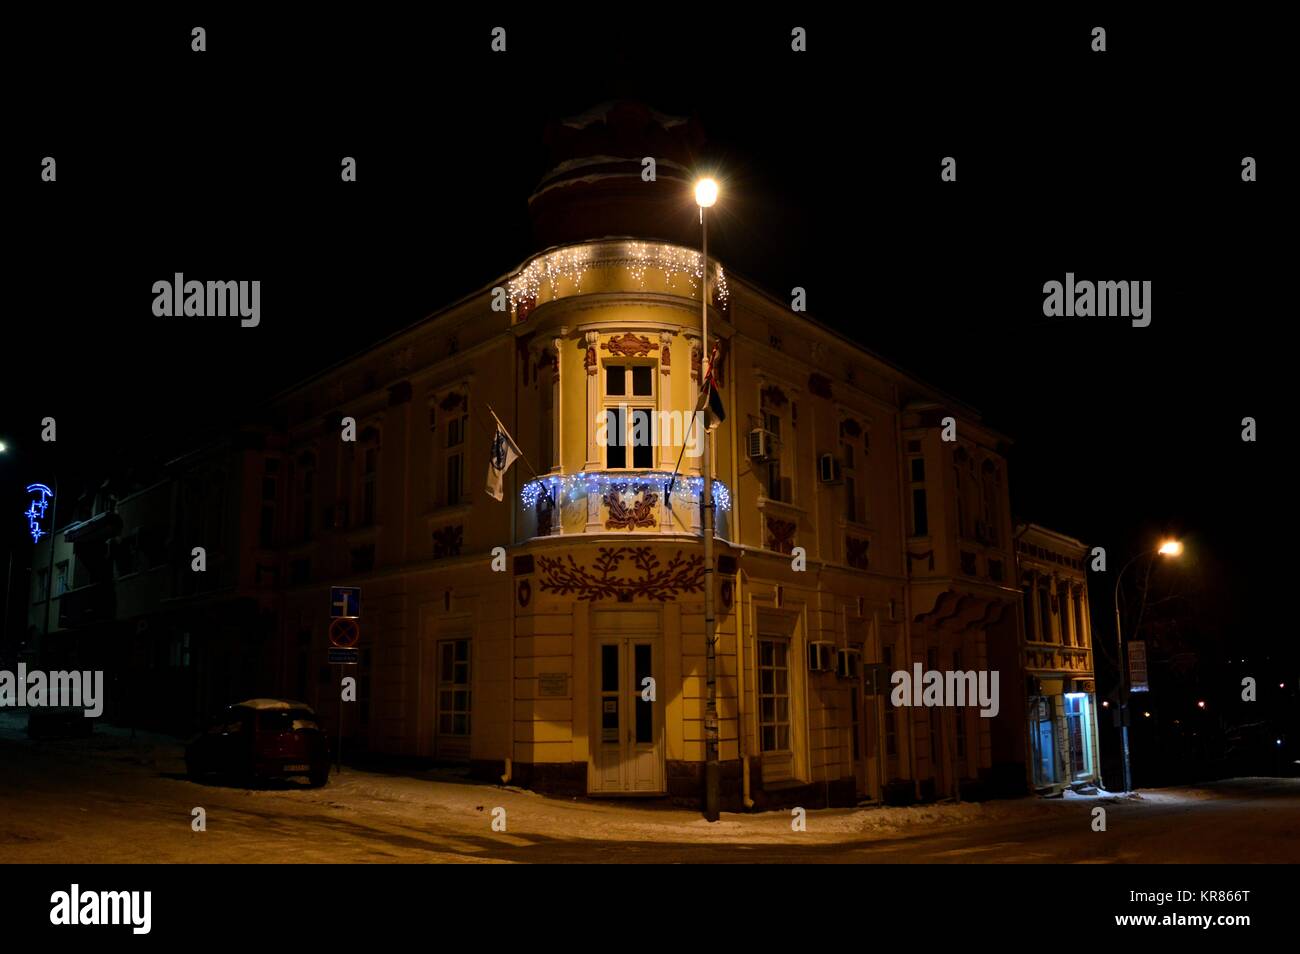 Ornate building at night Banque D'Images